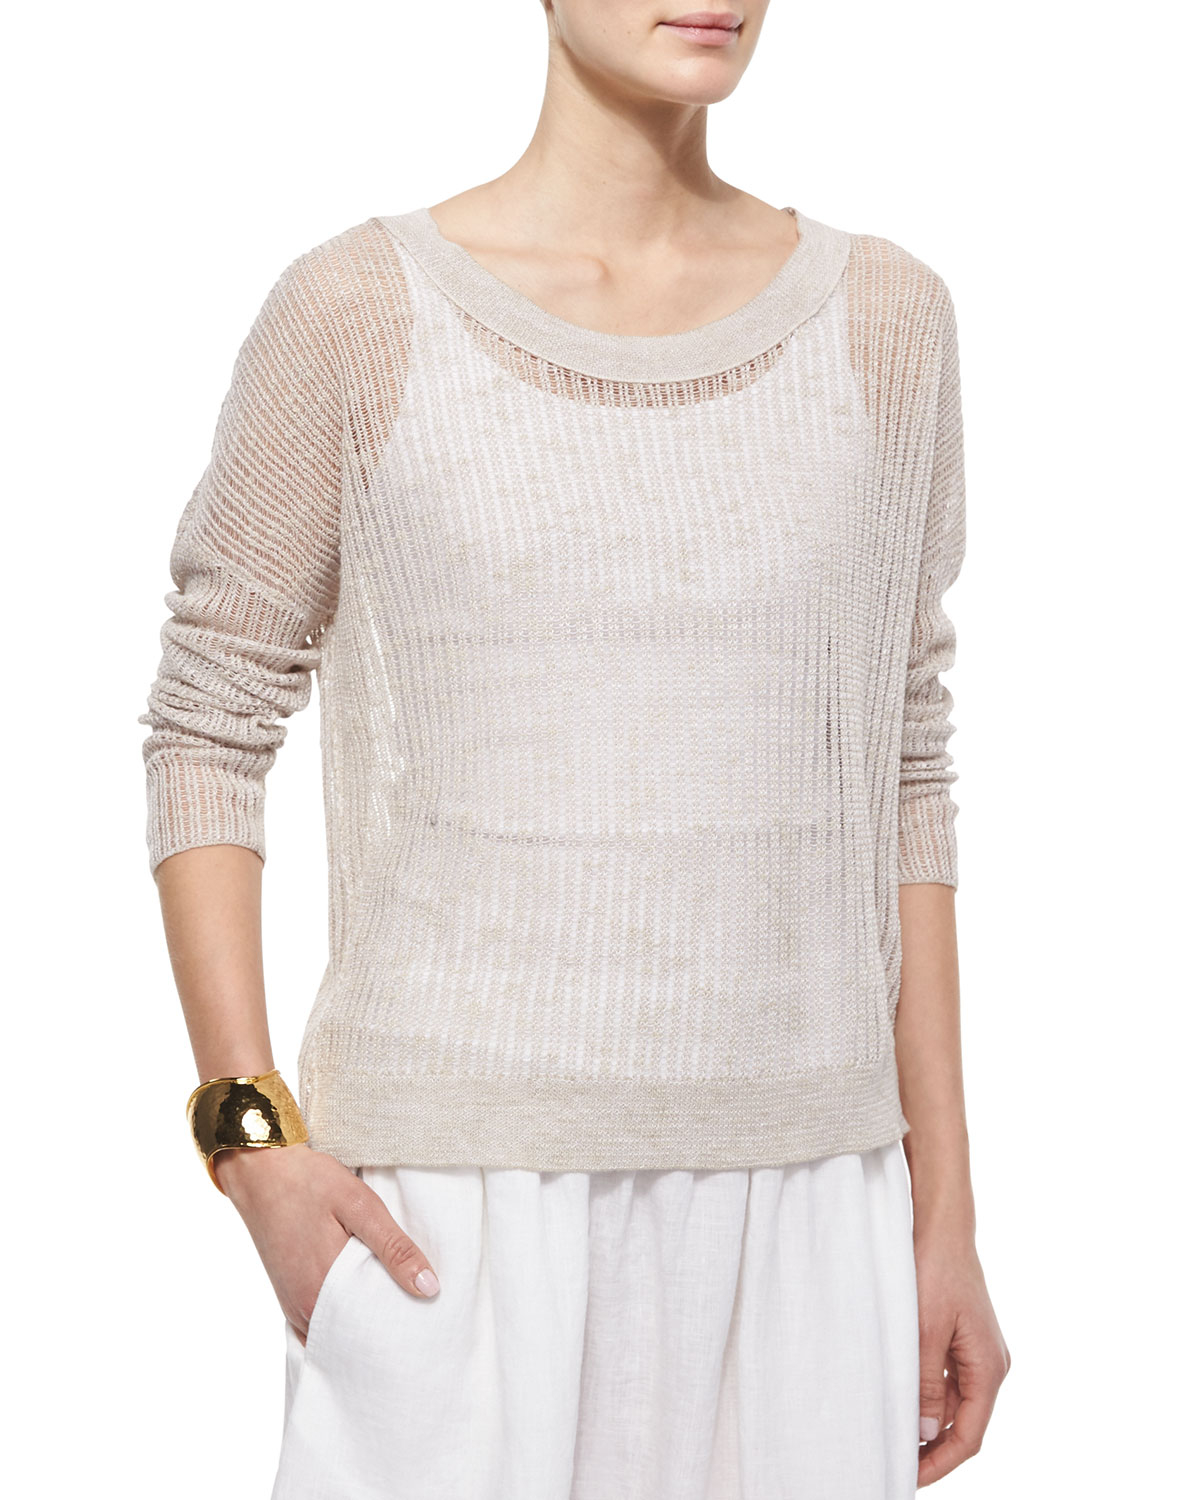 Lyst - Eileen Fisher Long-sleeve Organic Open-stitch Knit Top in Natural